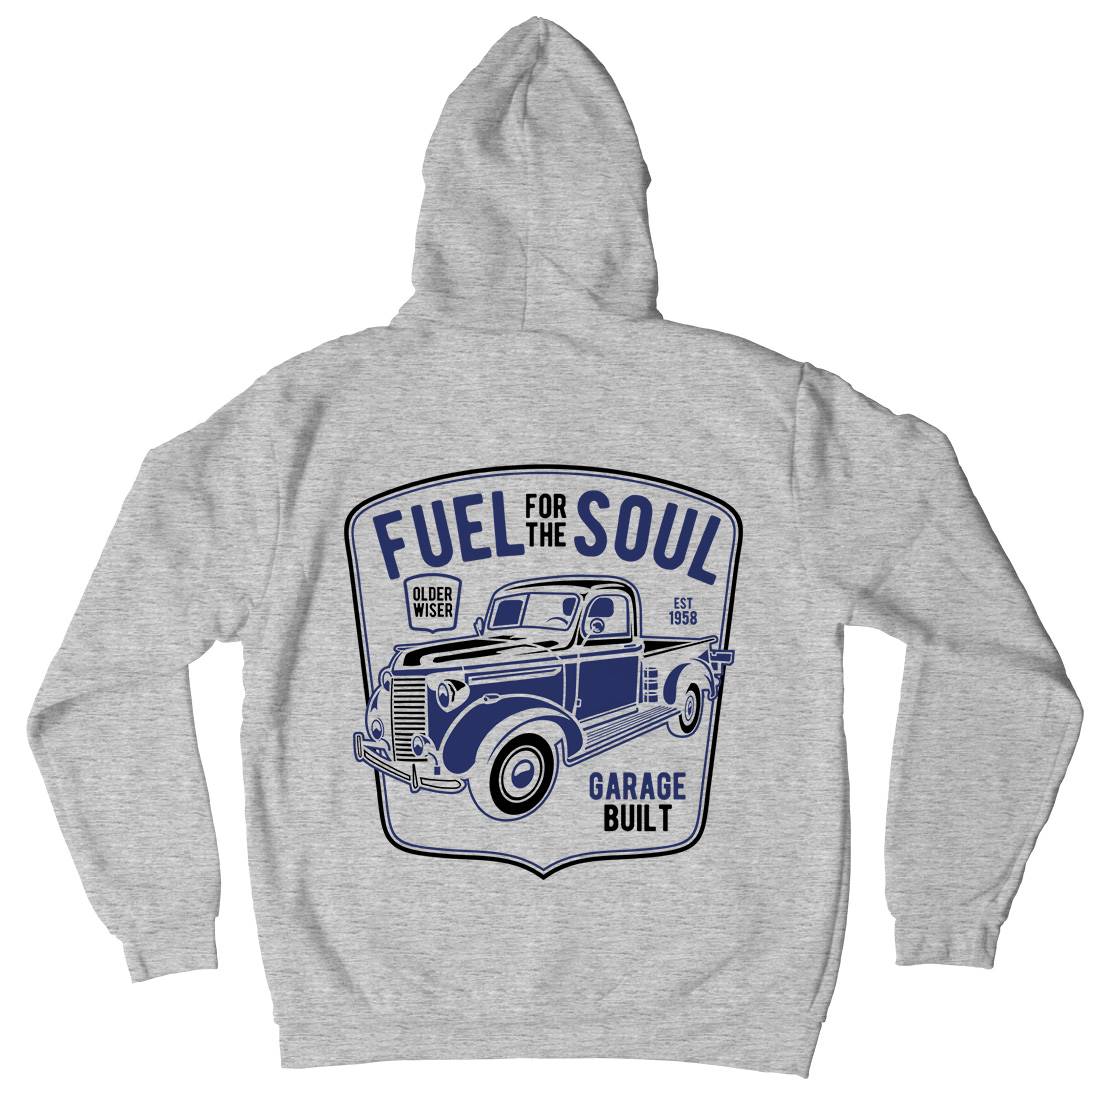 Fuel For The Soul Mens Hoodie With Pocket Cars B213